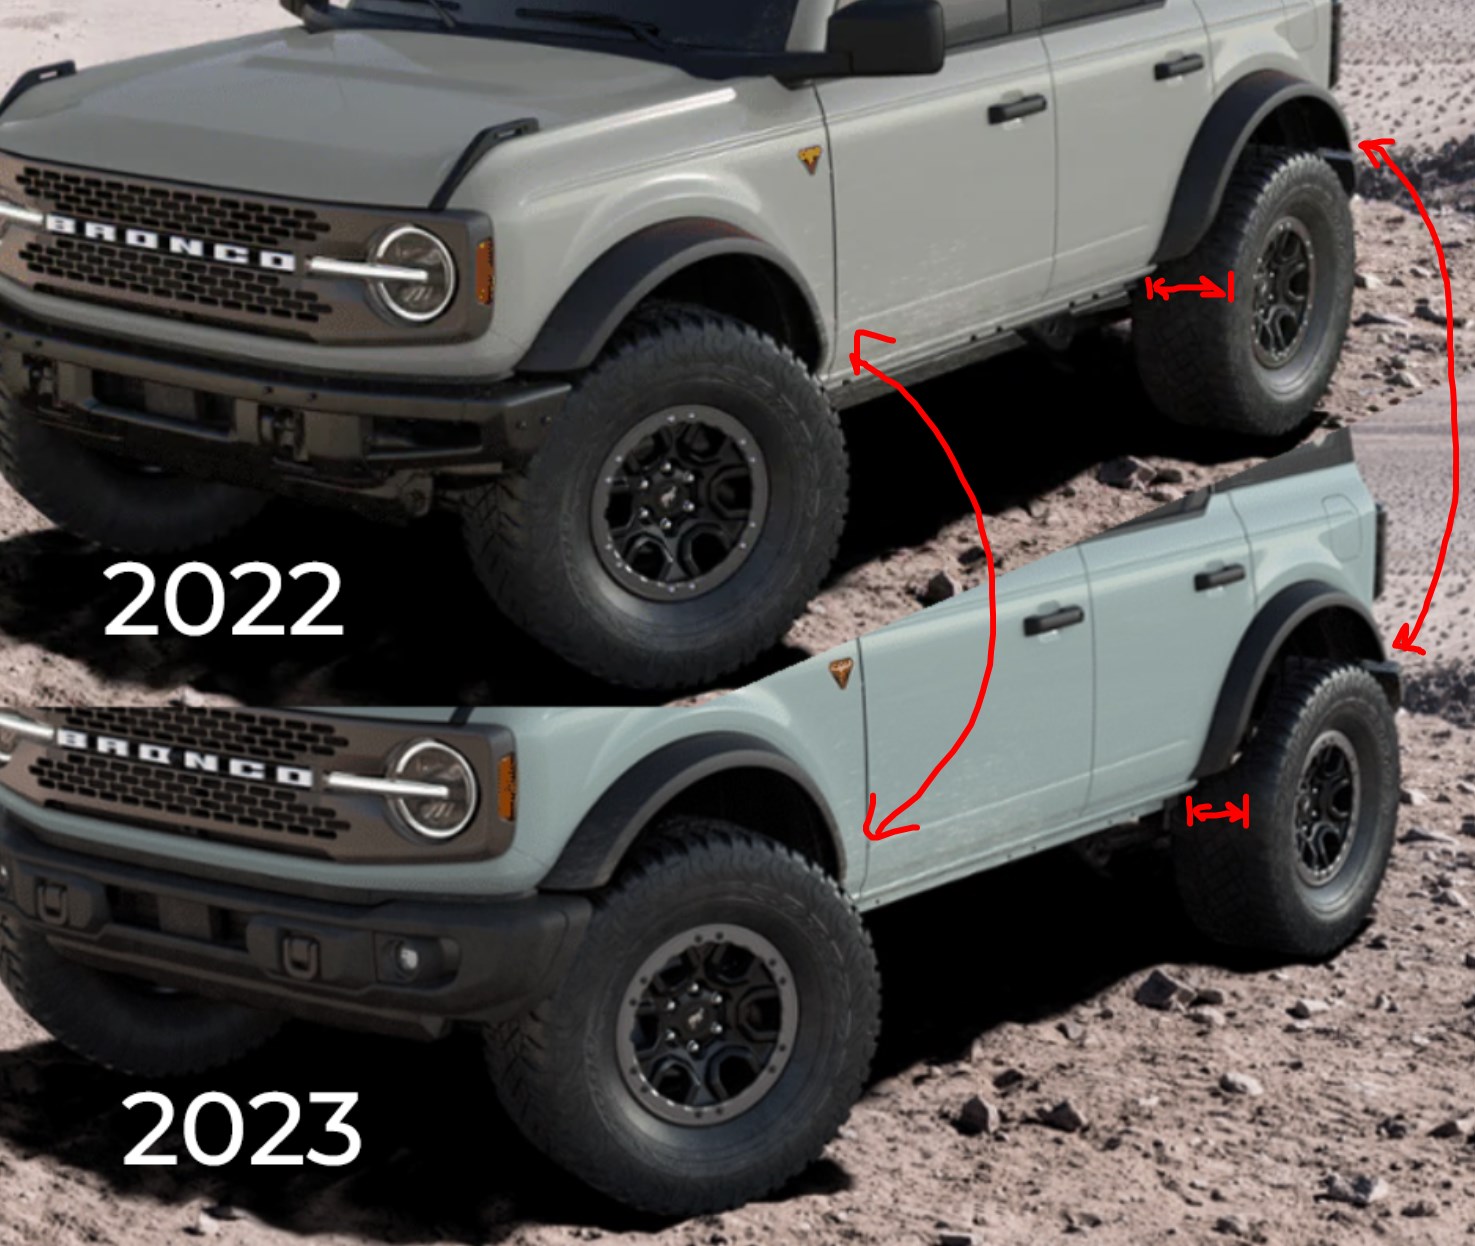 Ford Bronco Bronco Builder 2022 vs 2023: Color and fender differences? Photoshop_2022-10-04_13-09-02